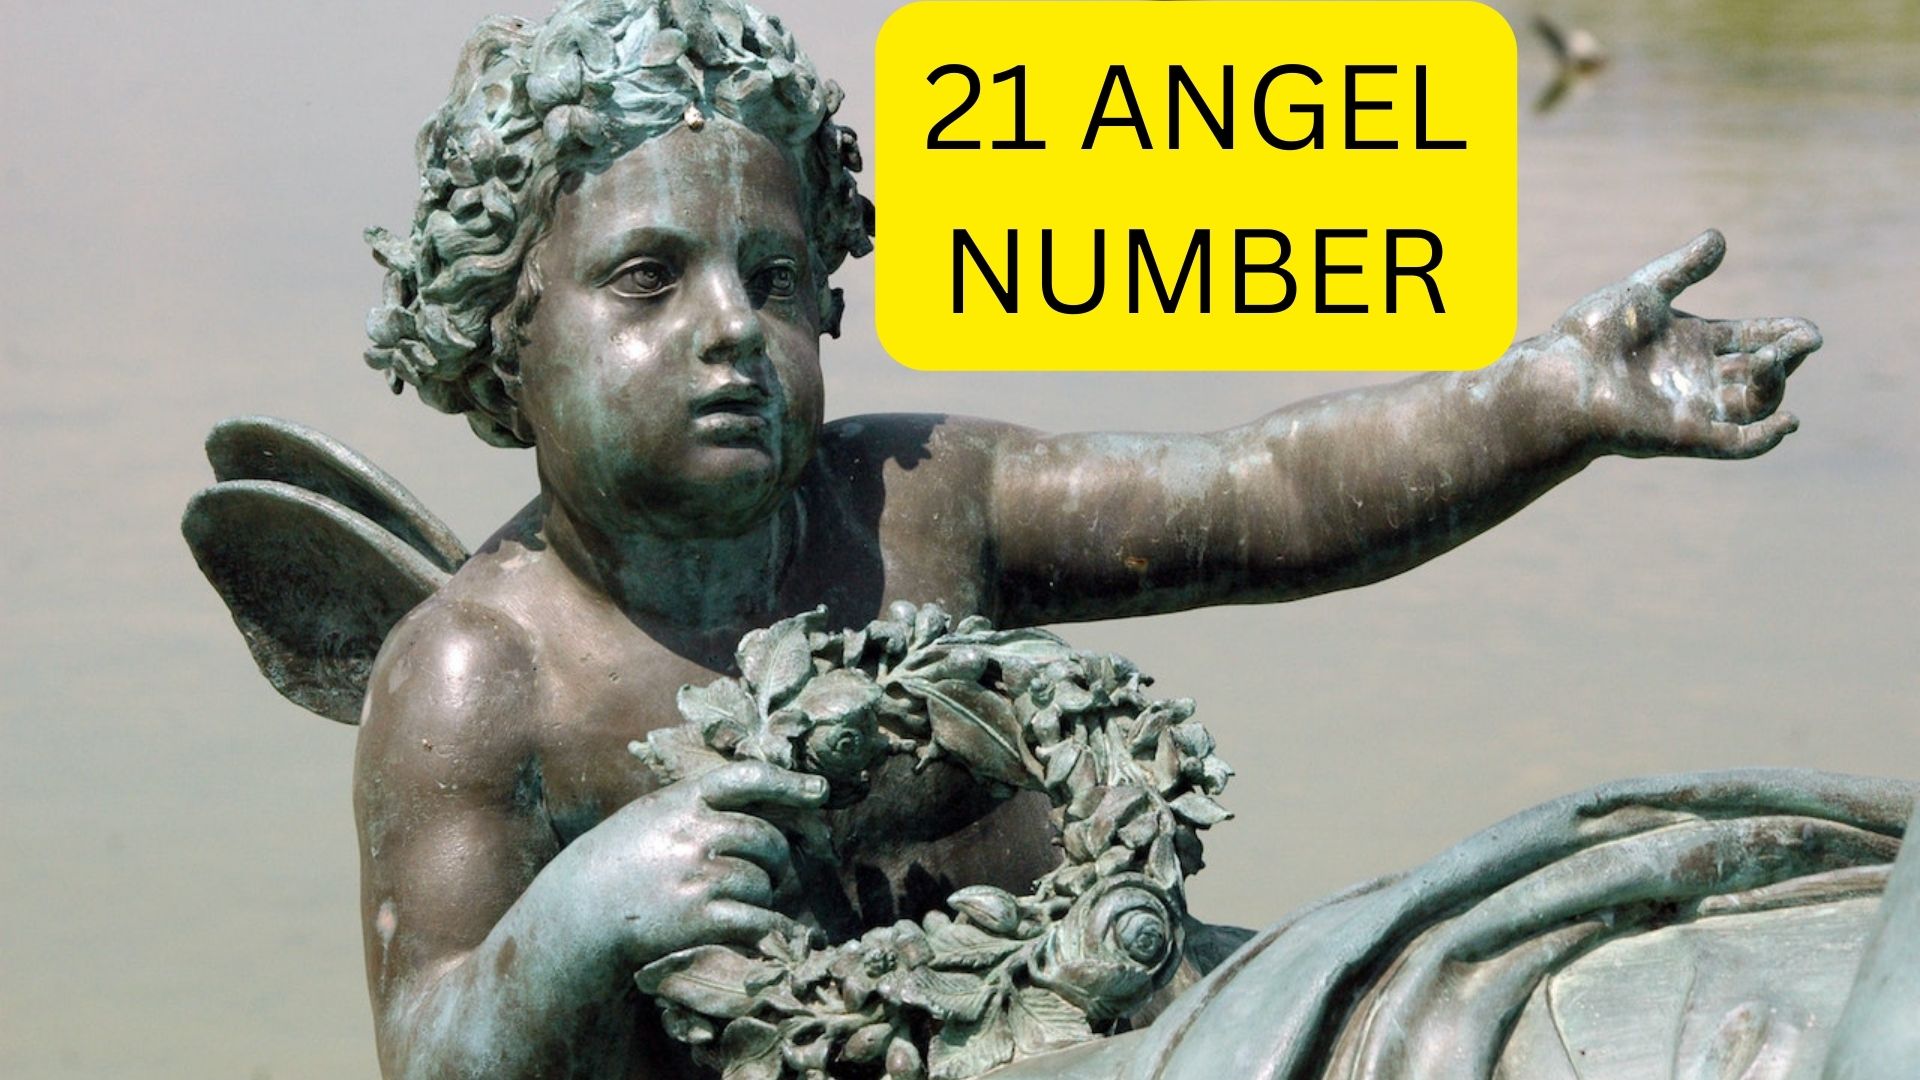 21 Angel Number - Represent Encouragement And Support